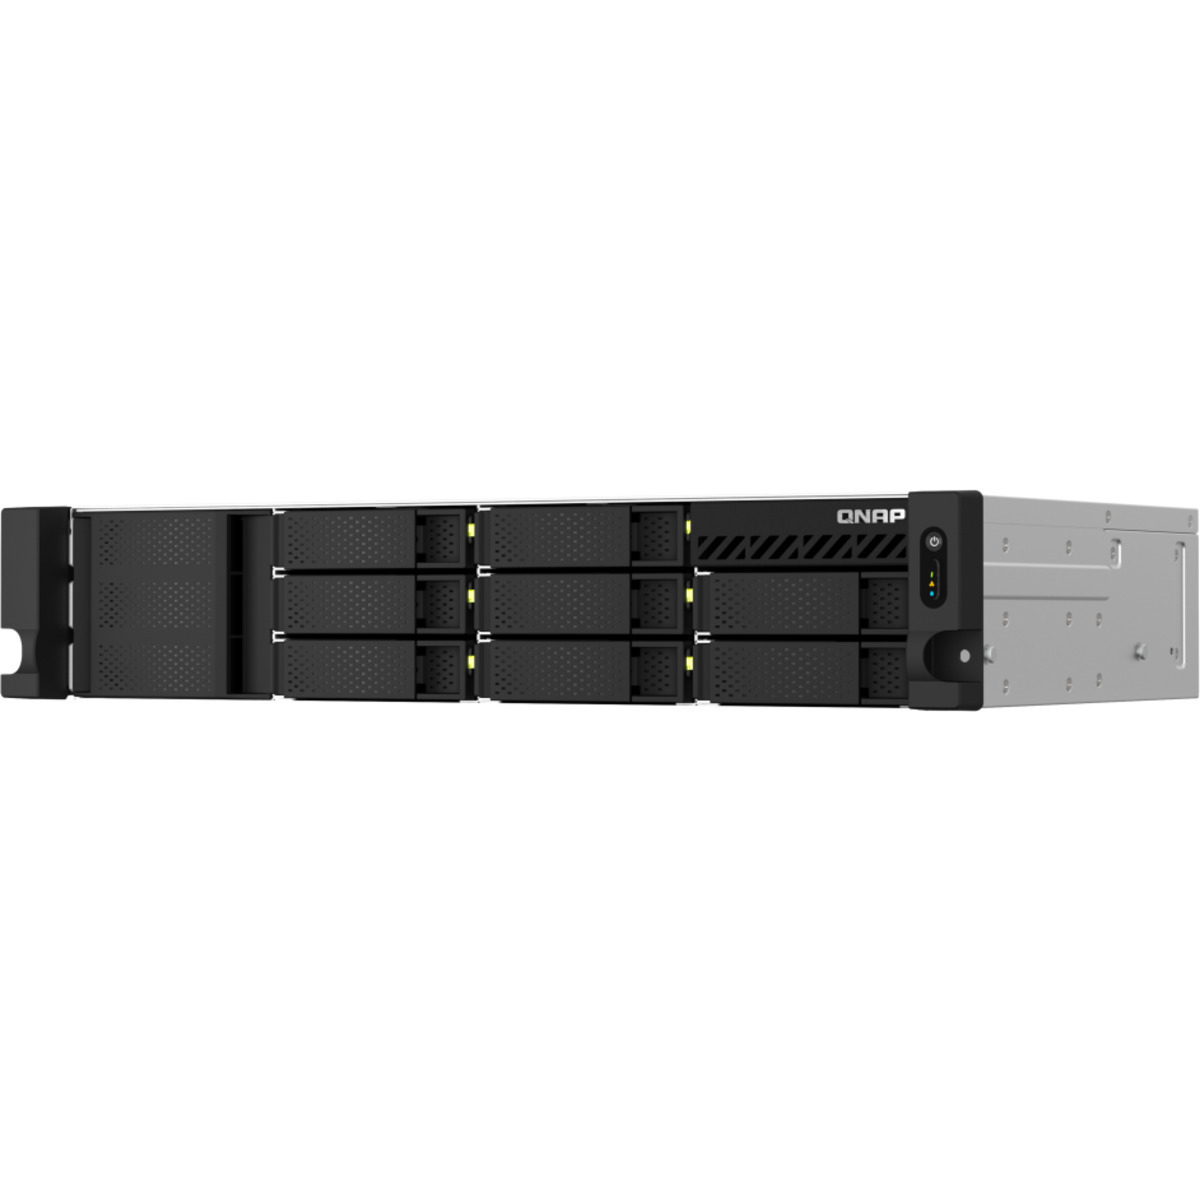 QNAP TS-864eU 60tb 8-Bay RackMount Multimedia / Power User / Business NAS - Network Attached Storage Device 5x12tb Seagate IronWolf Pro ST12000NT001 3.5 7200rpm SATA 6Gb/s HDD NAS Class Drives Installed - Burn-In Tested - ON SALE TS-864eU